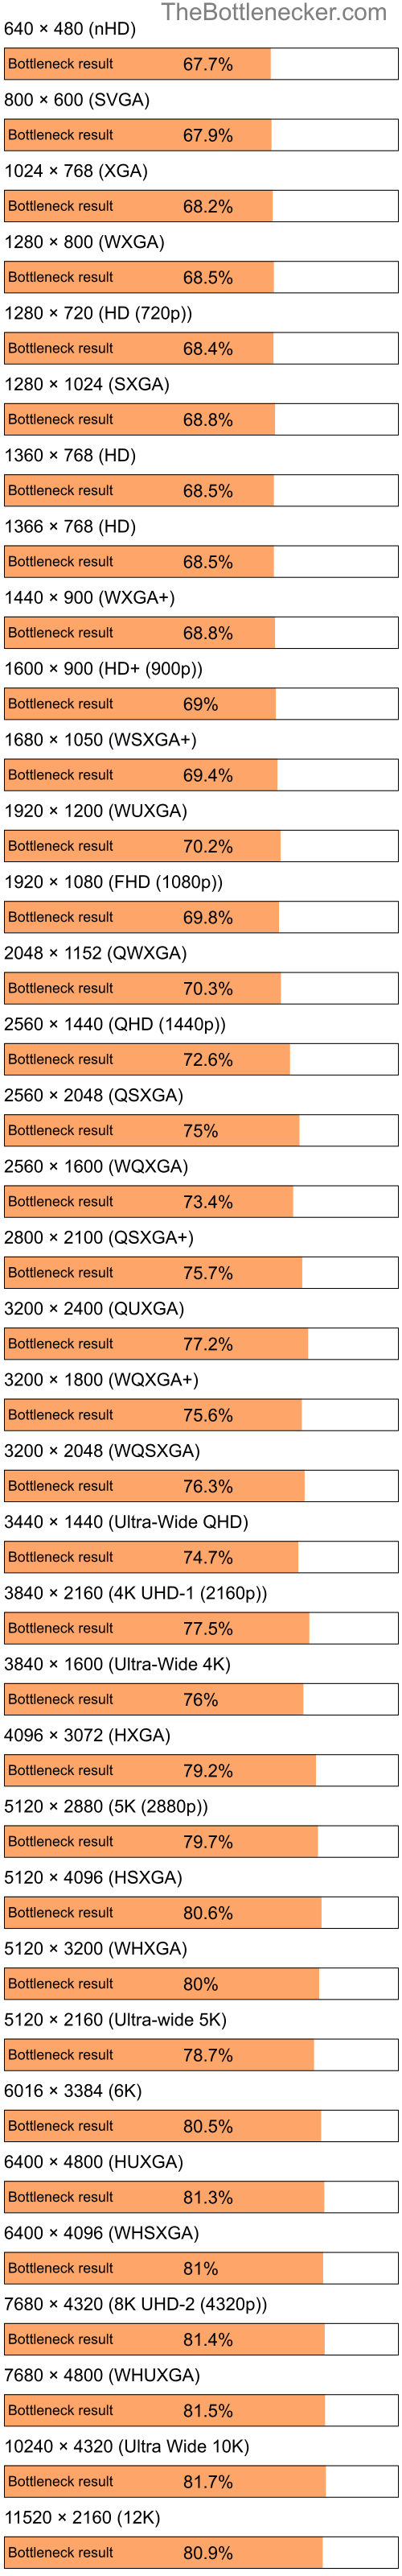 Bottleneck results by resolution for Intel Pentium 4 and AMD Radeon X1550 in General Tasks